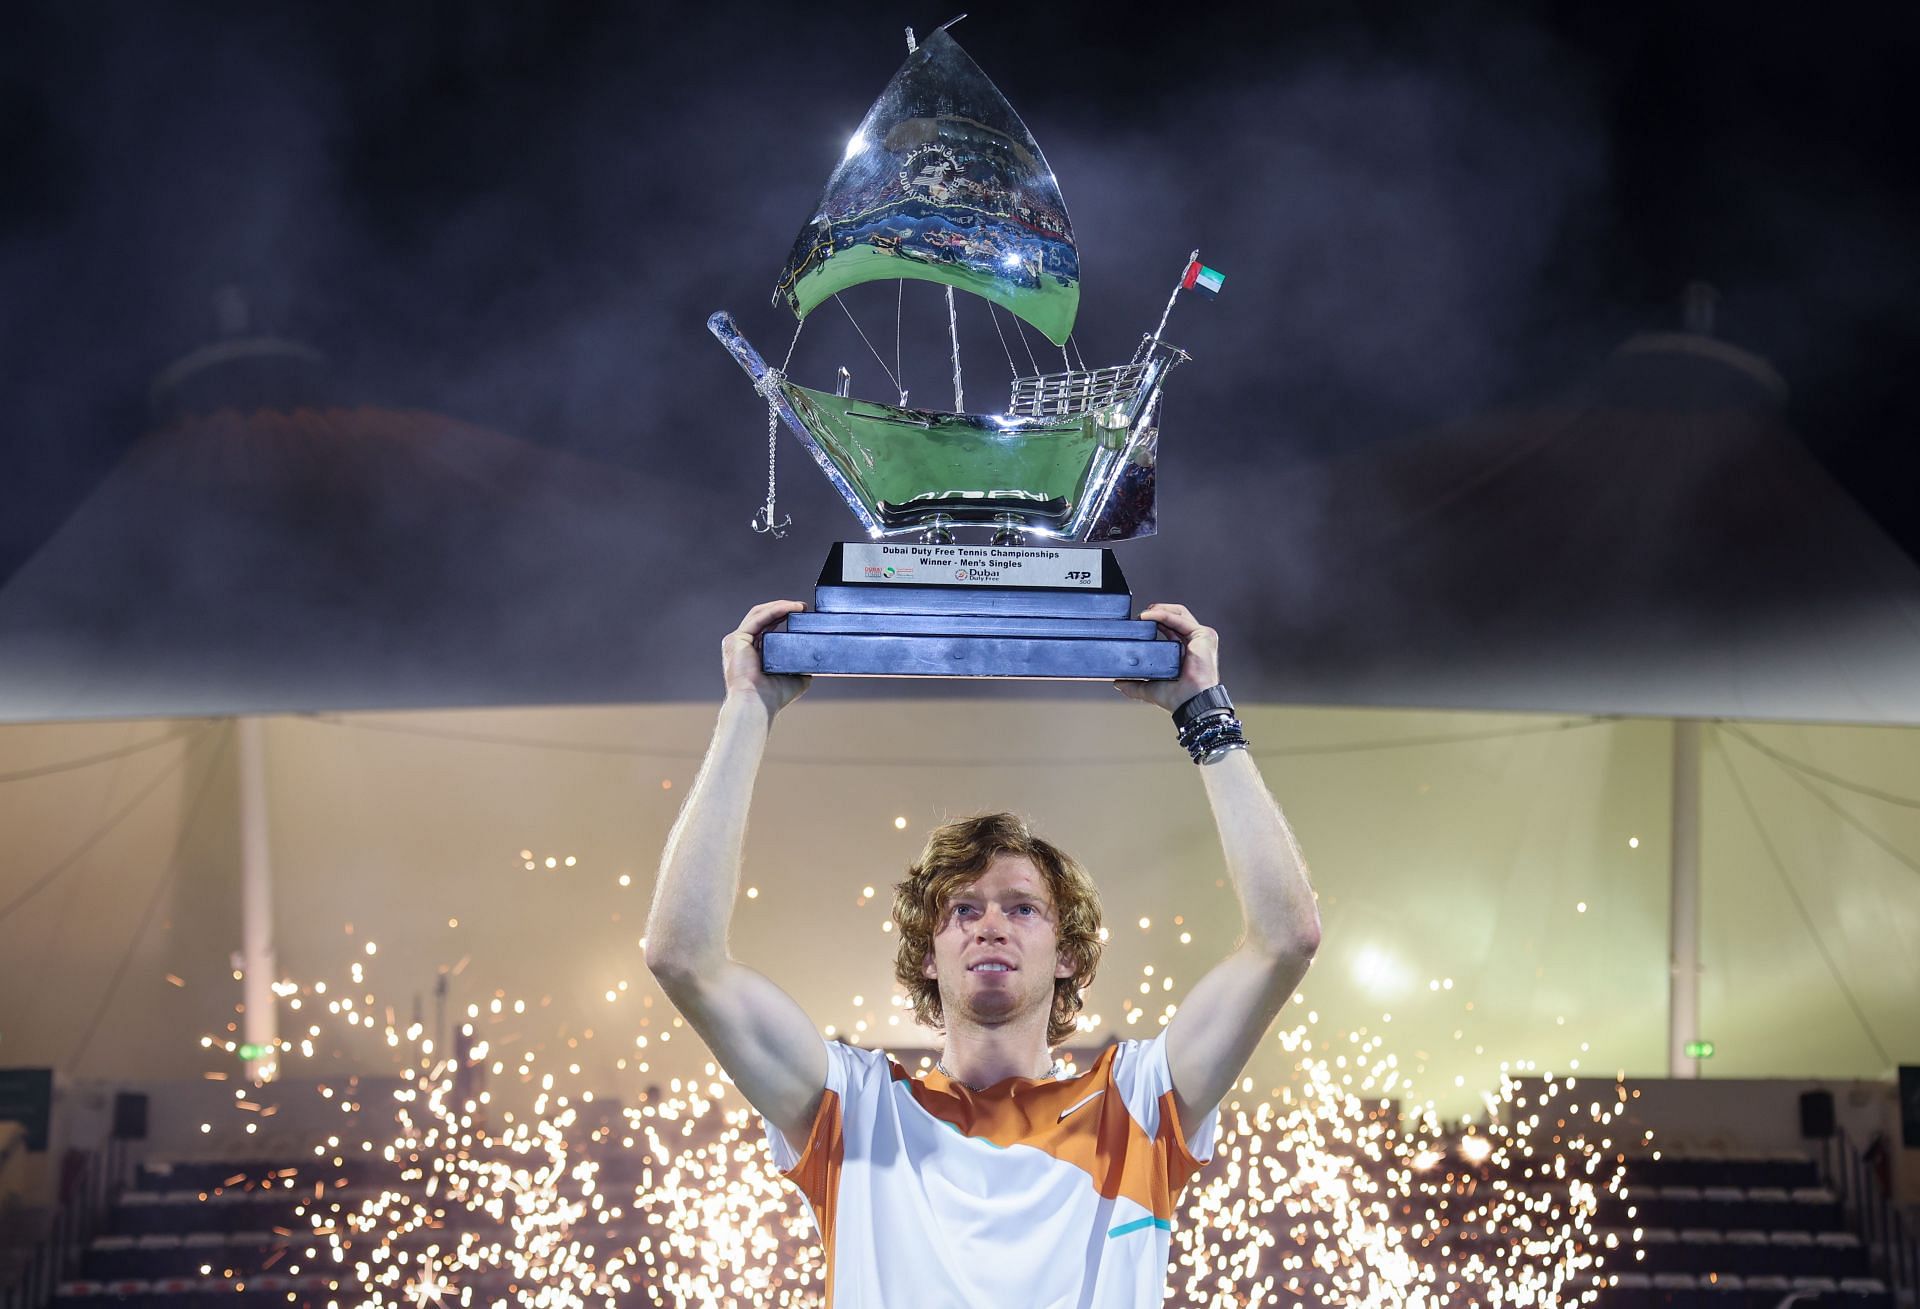 Andrey Rublev is one of the favorites to win the Indian Wells title.